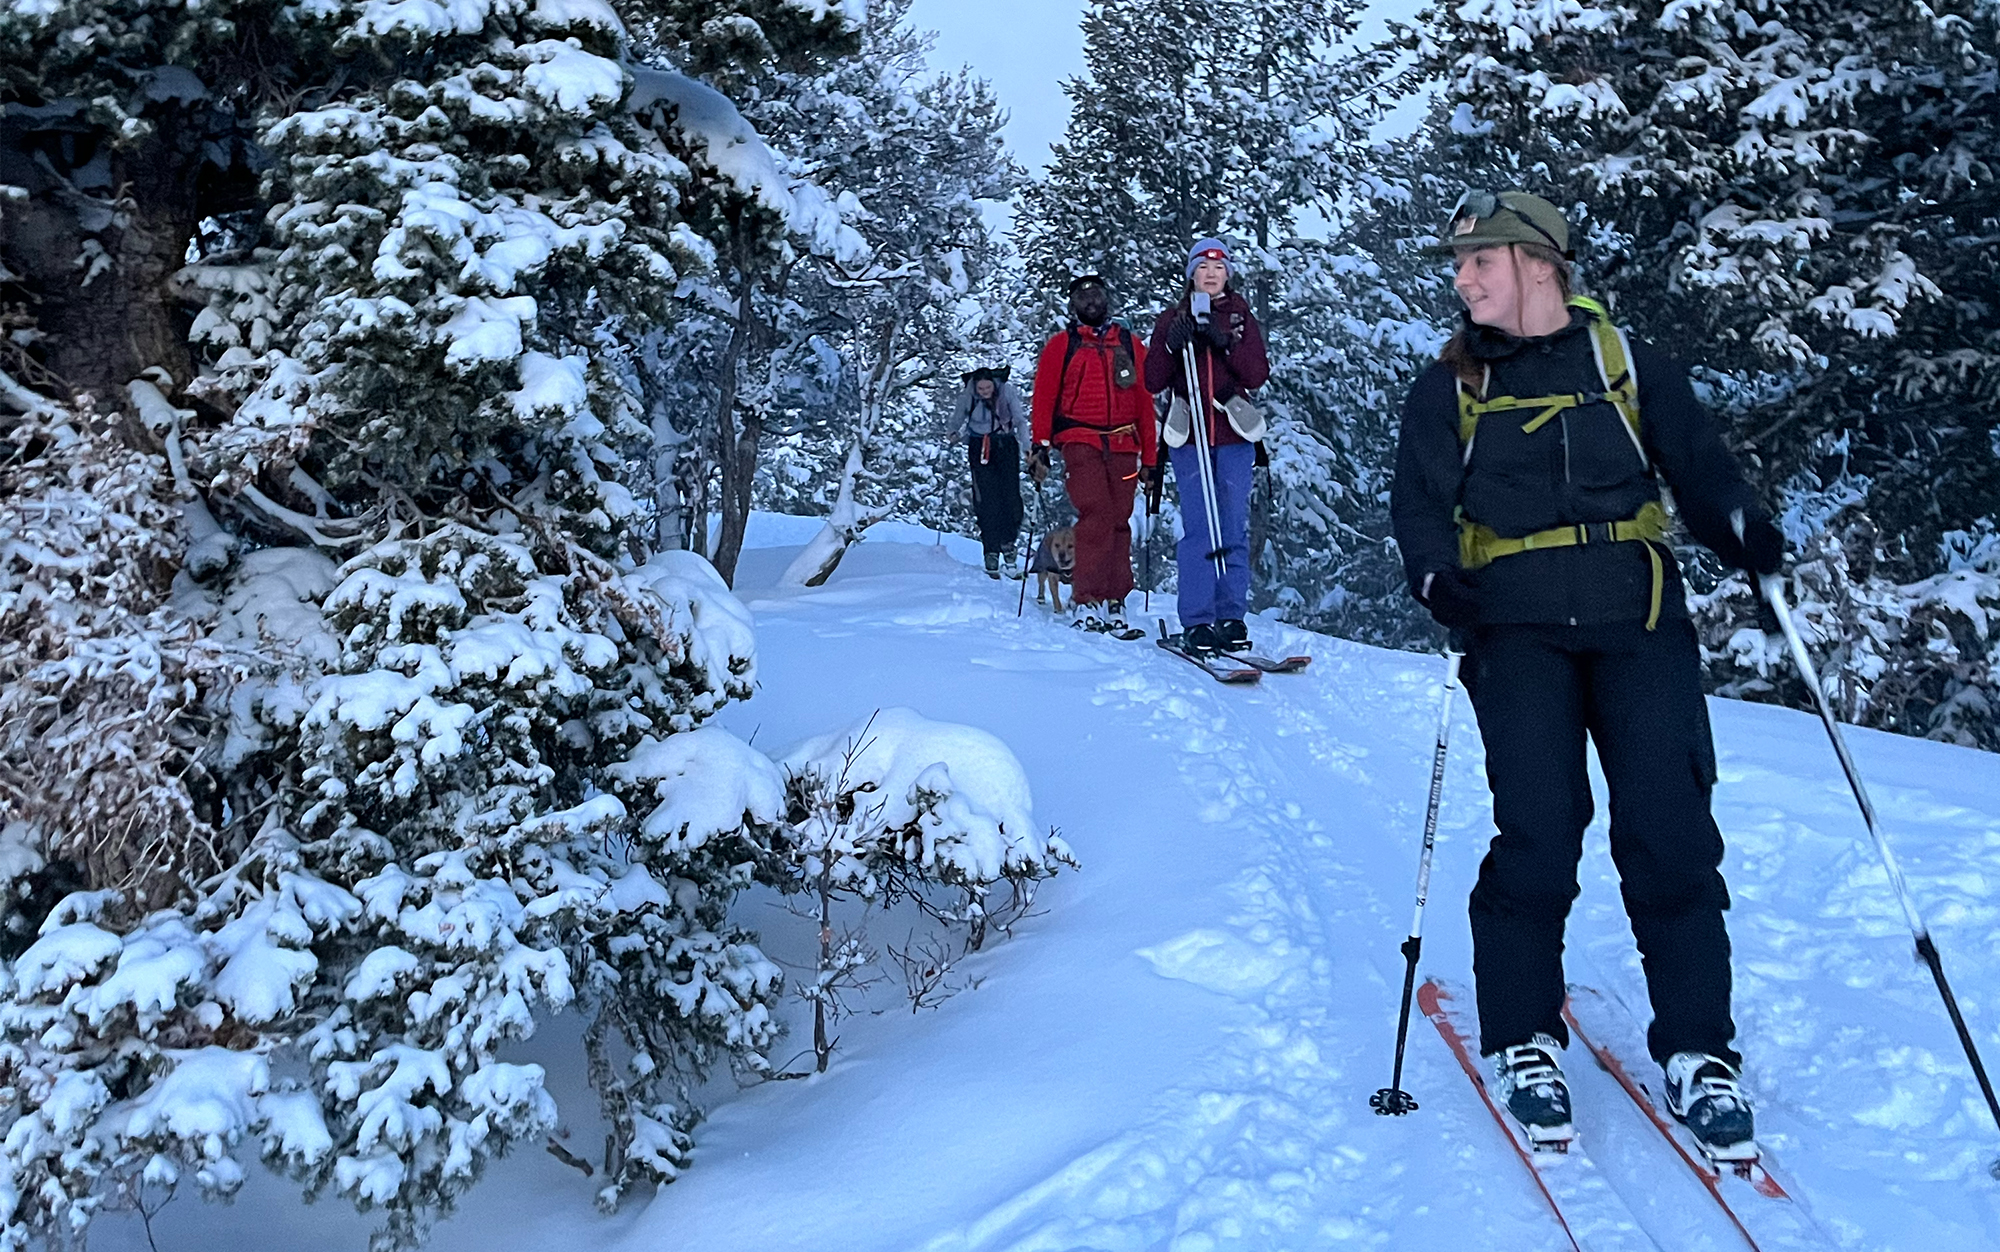 Backcountry skiing with friends is fun and safer than going alone.